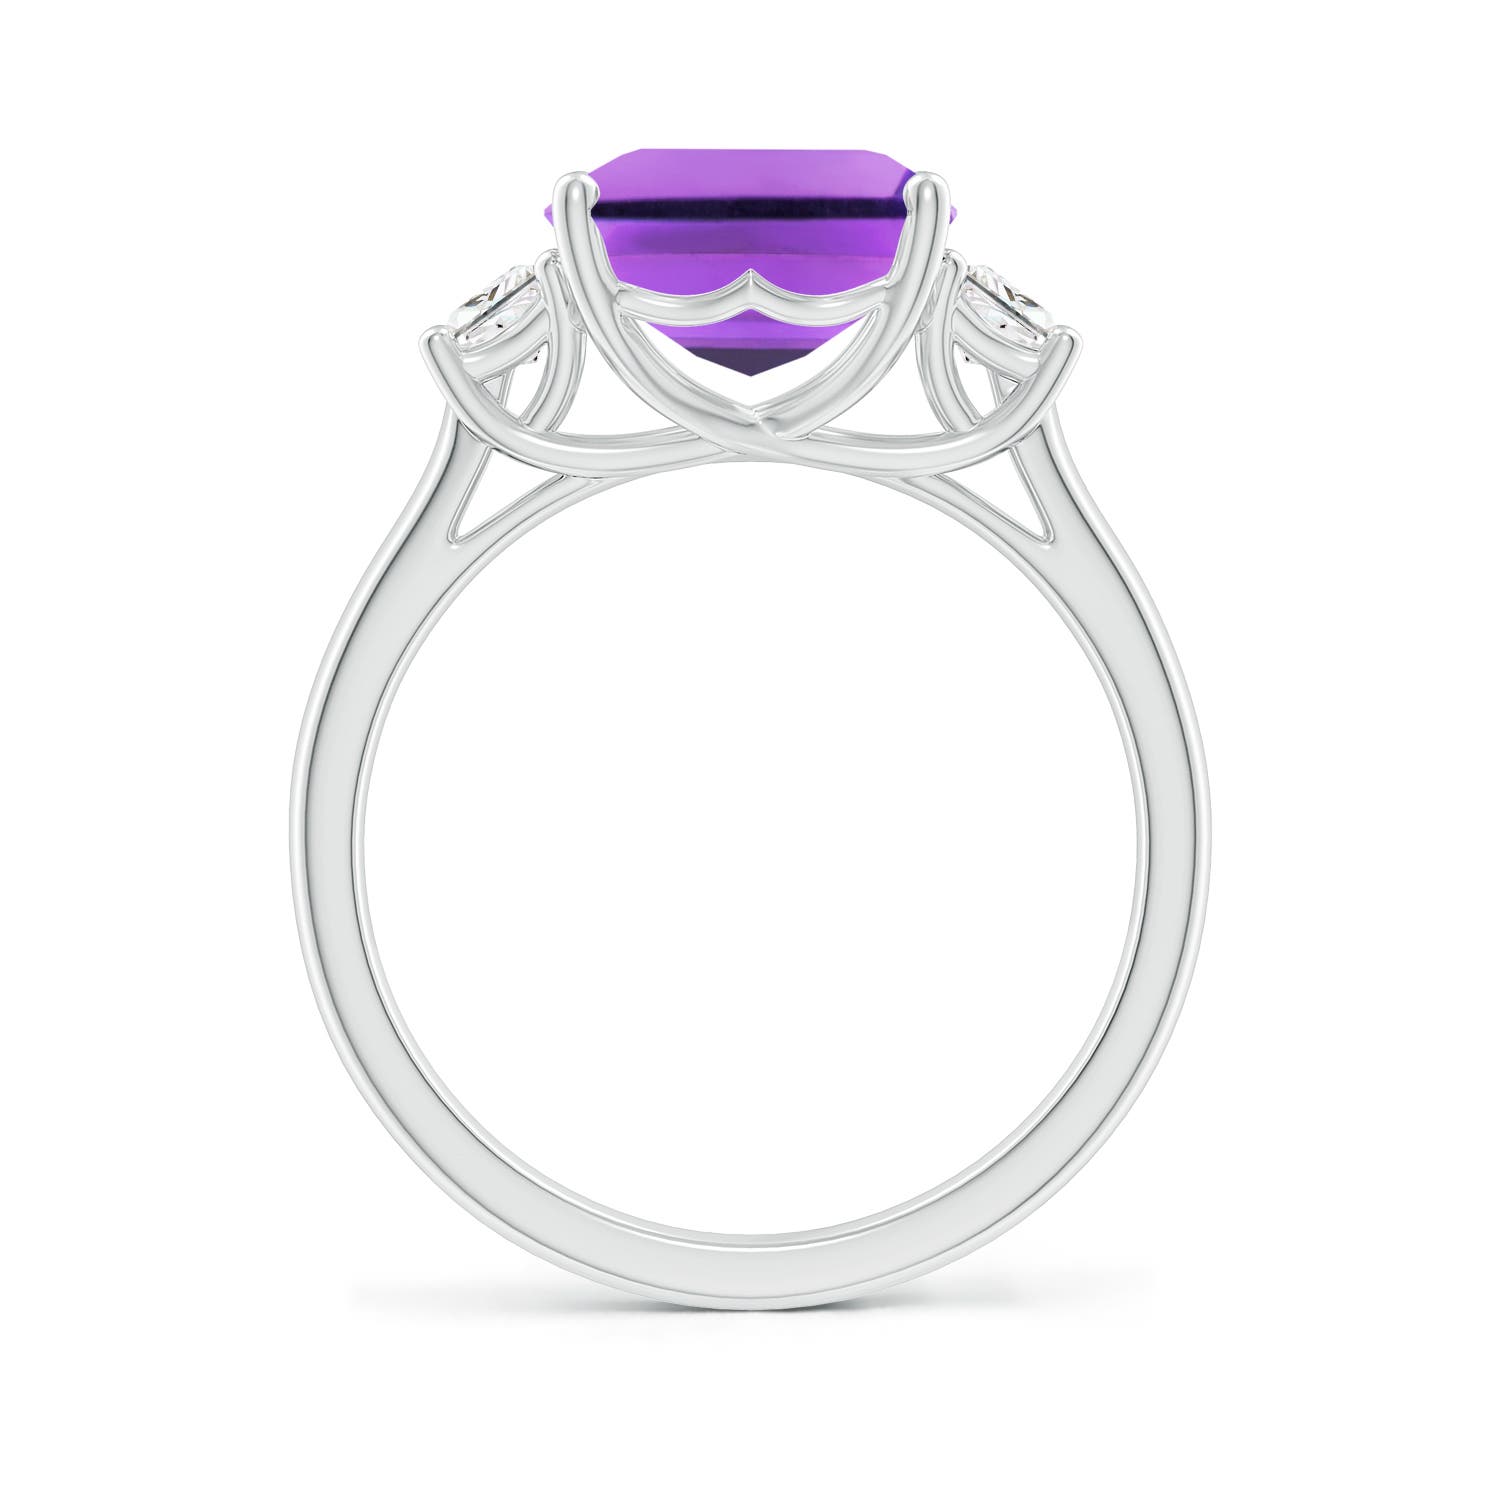 AA- Amethyst / 4.32 CT / 14 KT White Gold